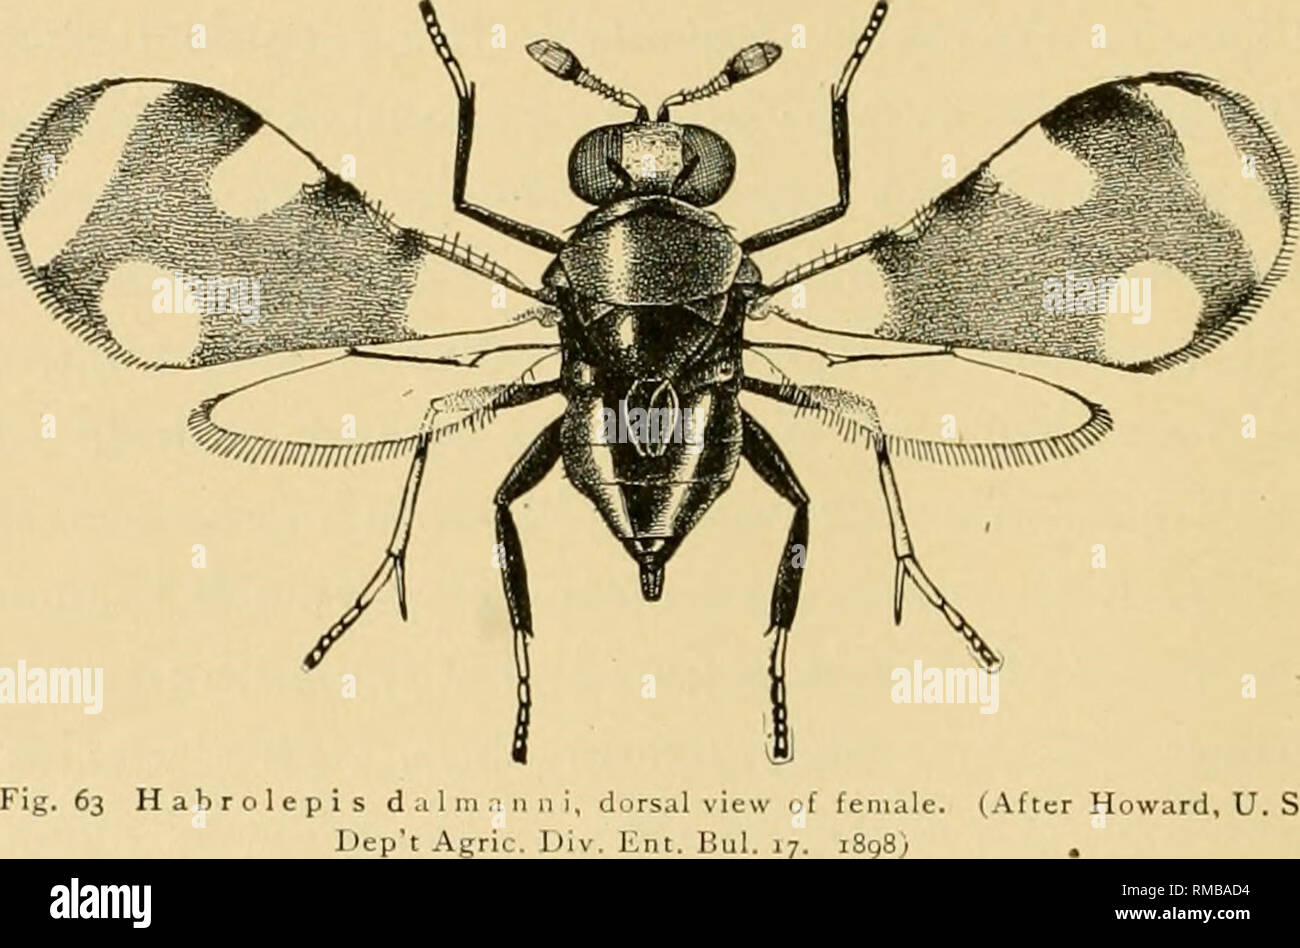 . Annual report. New York State Museum; Science. 330 NEW YORK STATE MUSEUM occurring rather widely on tlie English oak. This species was first reported from New York State by Professor Lowe who found the insect in 1894 very abundant on oaks at Geneva. He states that the species was present in great numbers and that two trees at the northern end of the row were nearly leafless and apparently dying. They were badly infested with the scales from the highest branches to nearly the base of the trunk, and the next two trees were apparently succumbing to the pest, since most of the lower limbs had no Stock Photo